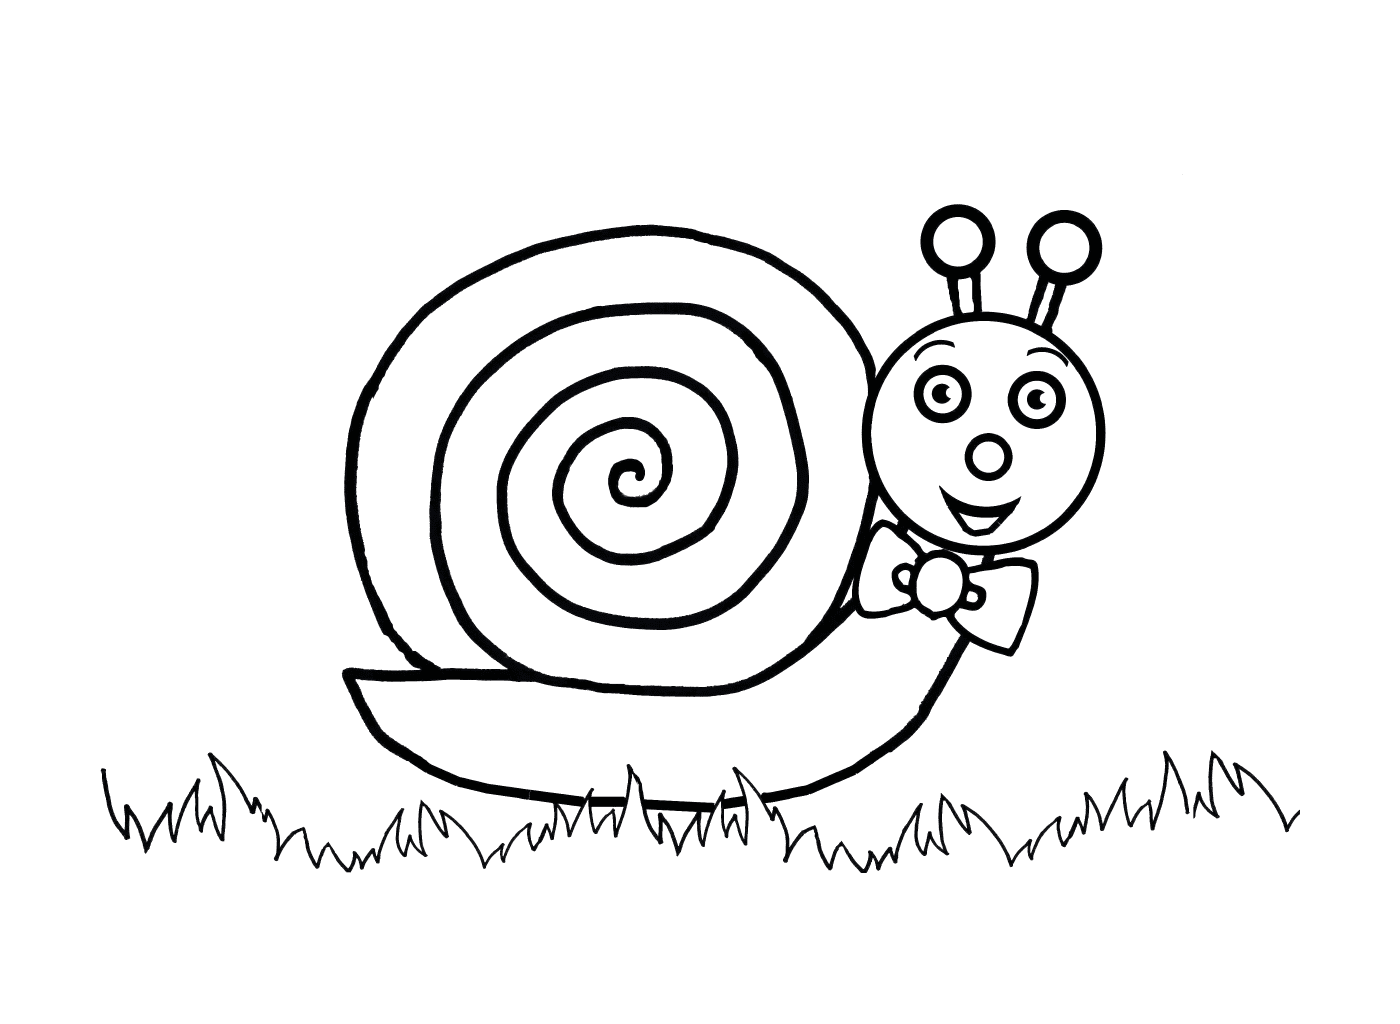  Snail with a big smile 